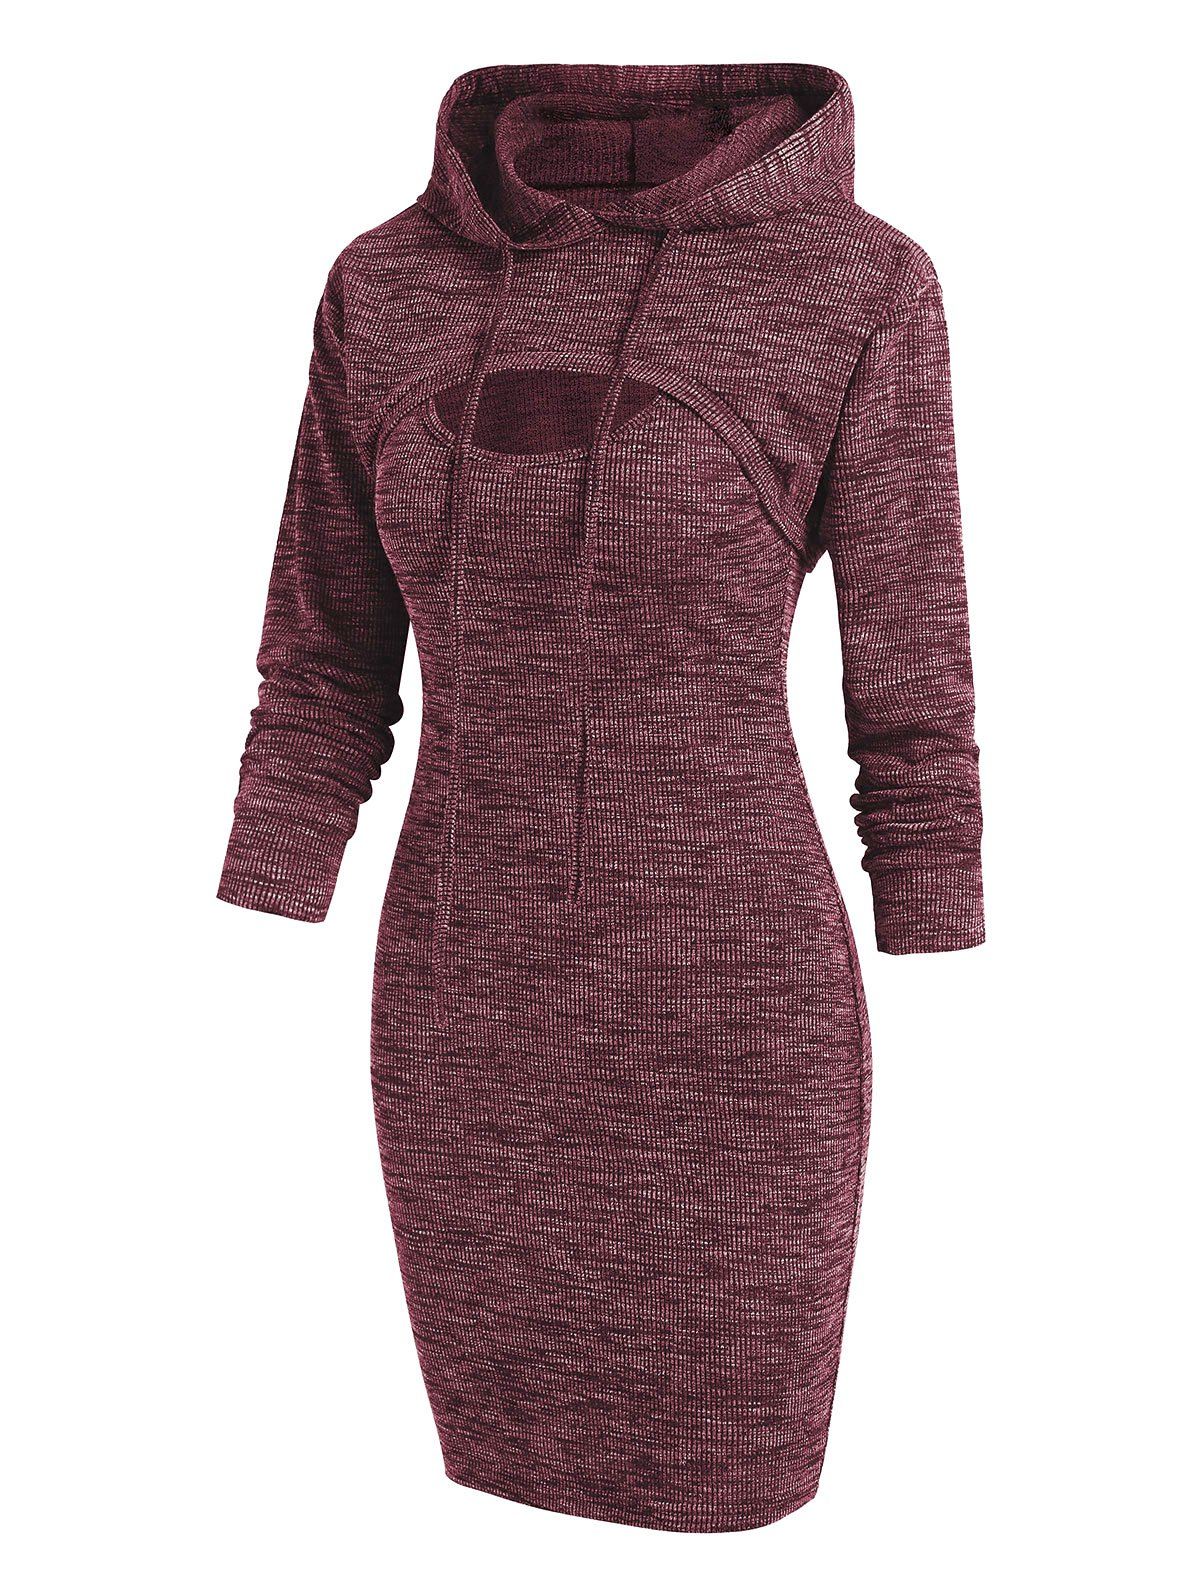 Heathered Knitted Bodycon Dress and Shrug Hoodie Set - DEEP RED XXL